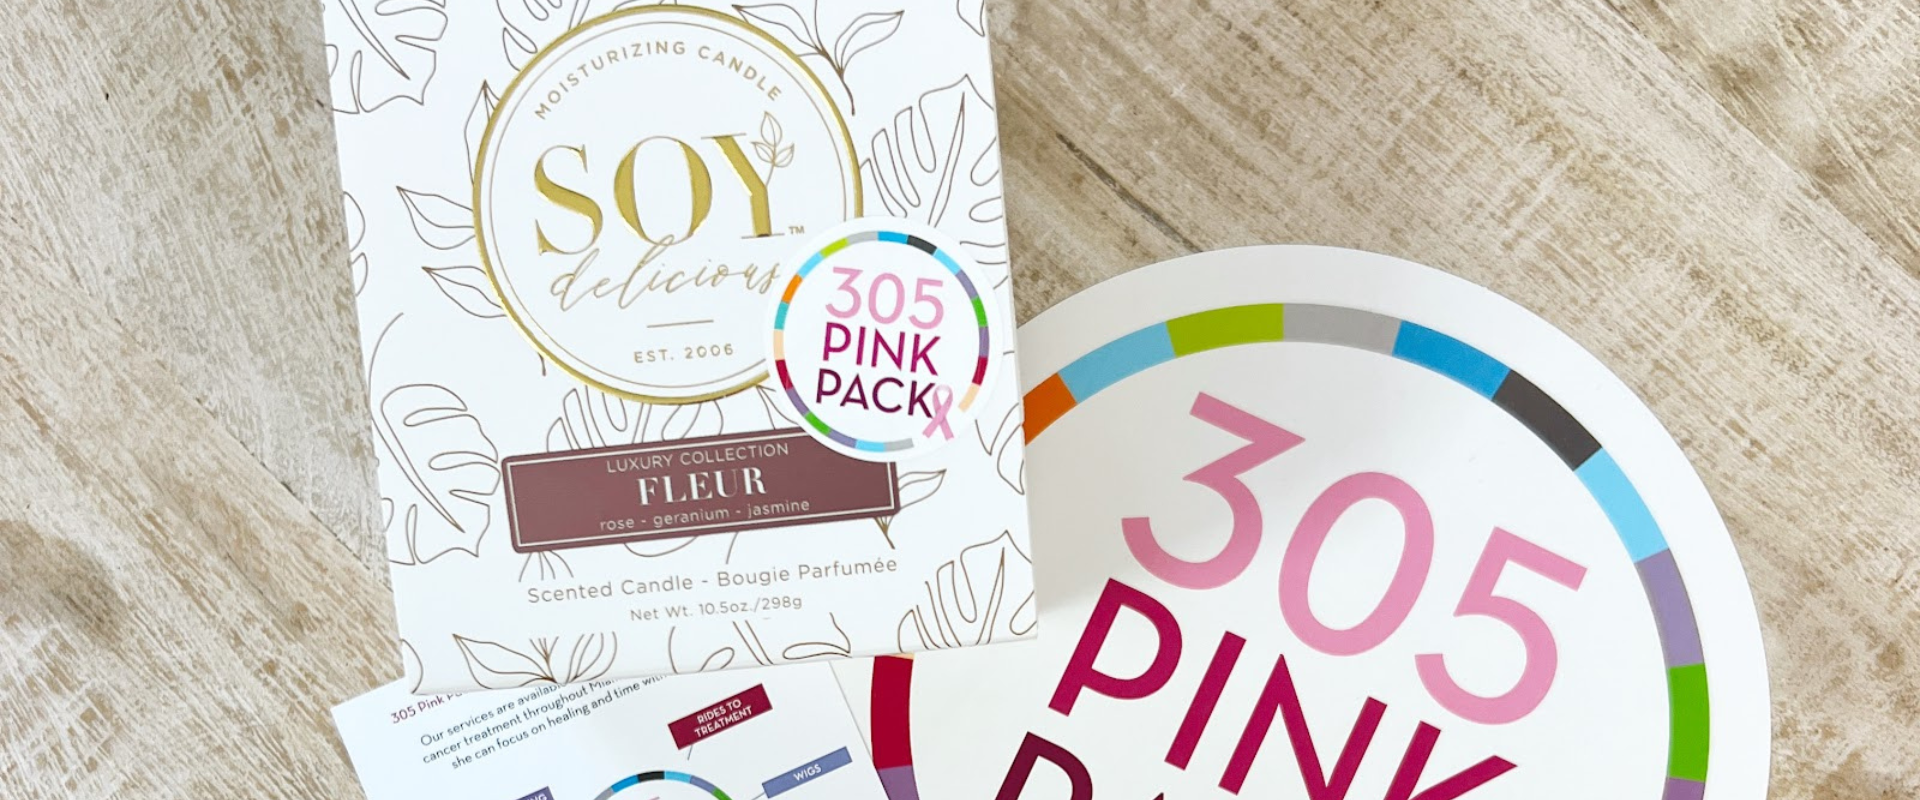 Our Partnership with 305 Pink Pack to Help Support Women with Cancer in South Florida